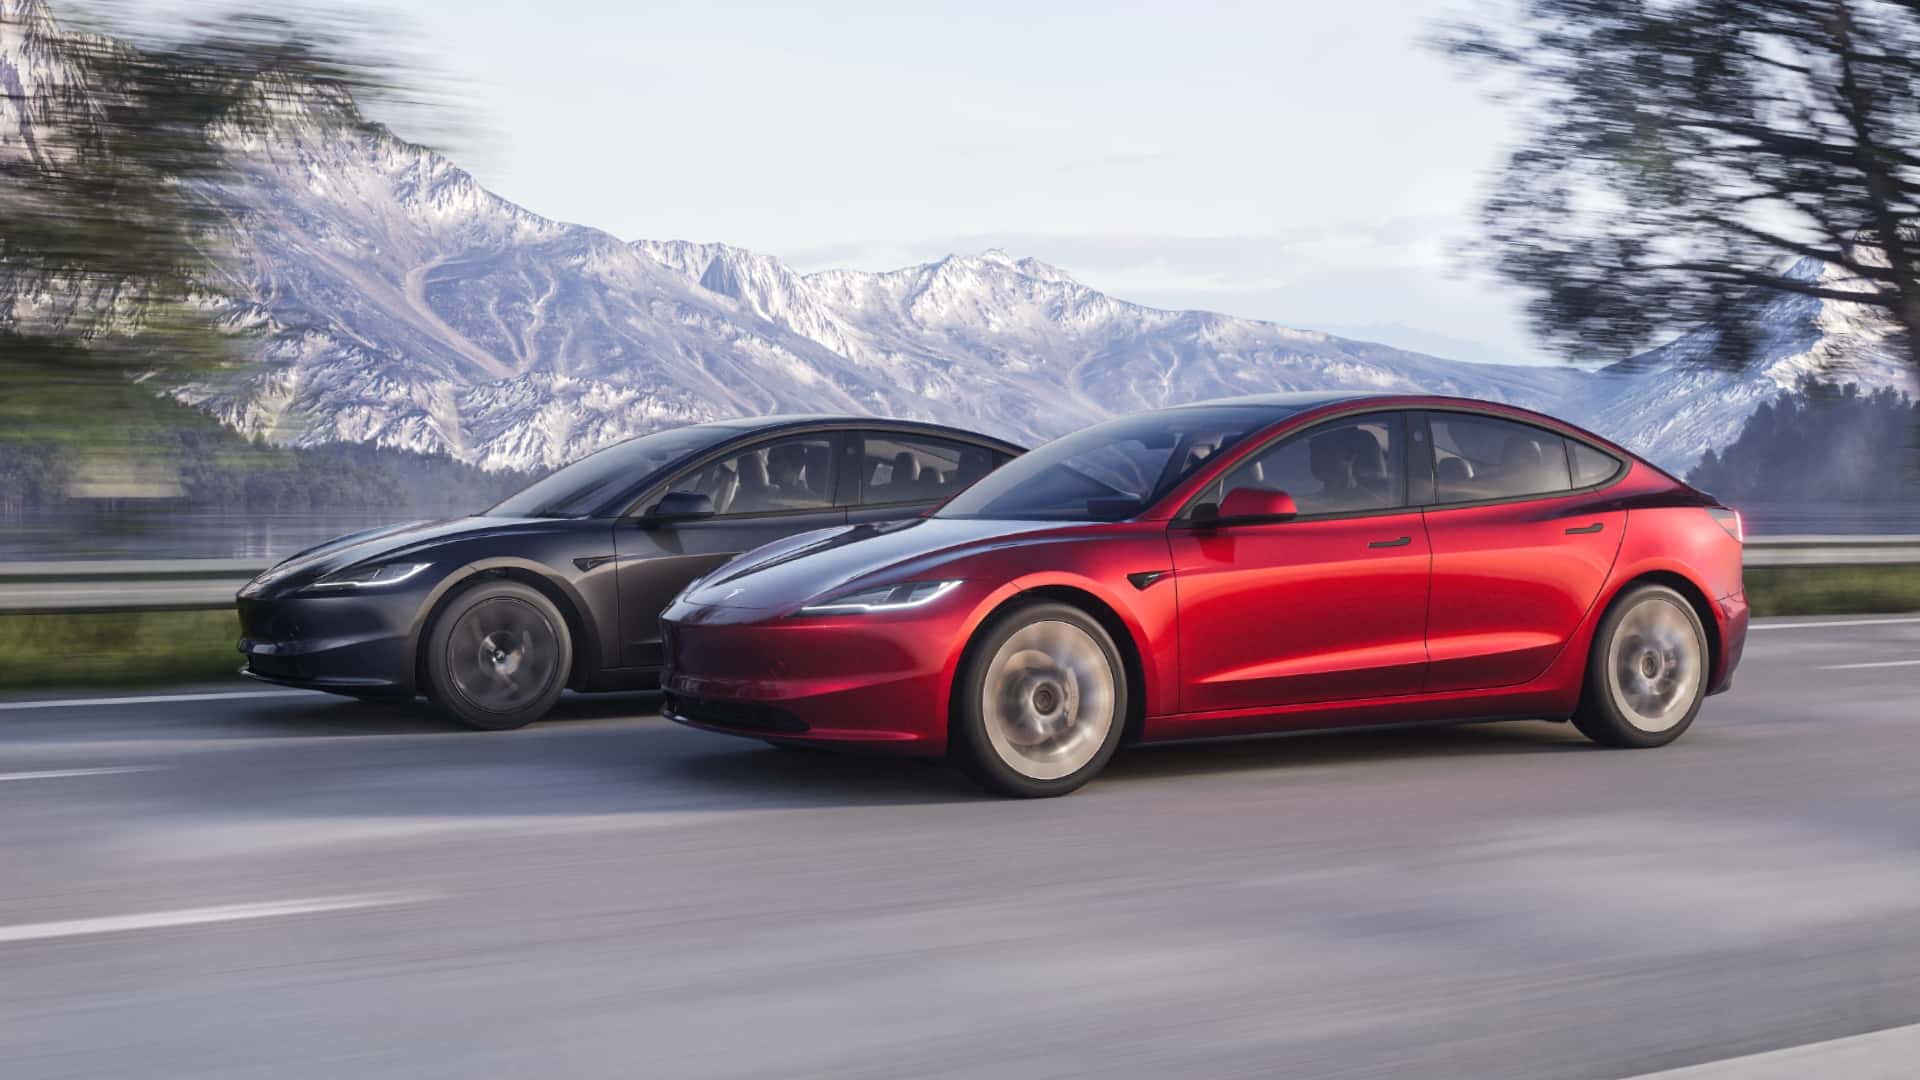 tesla model 3 might get ludicrous trim with sport suspension and brakes